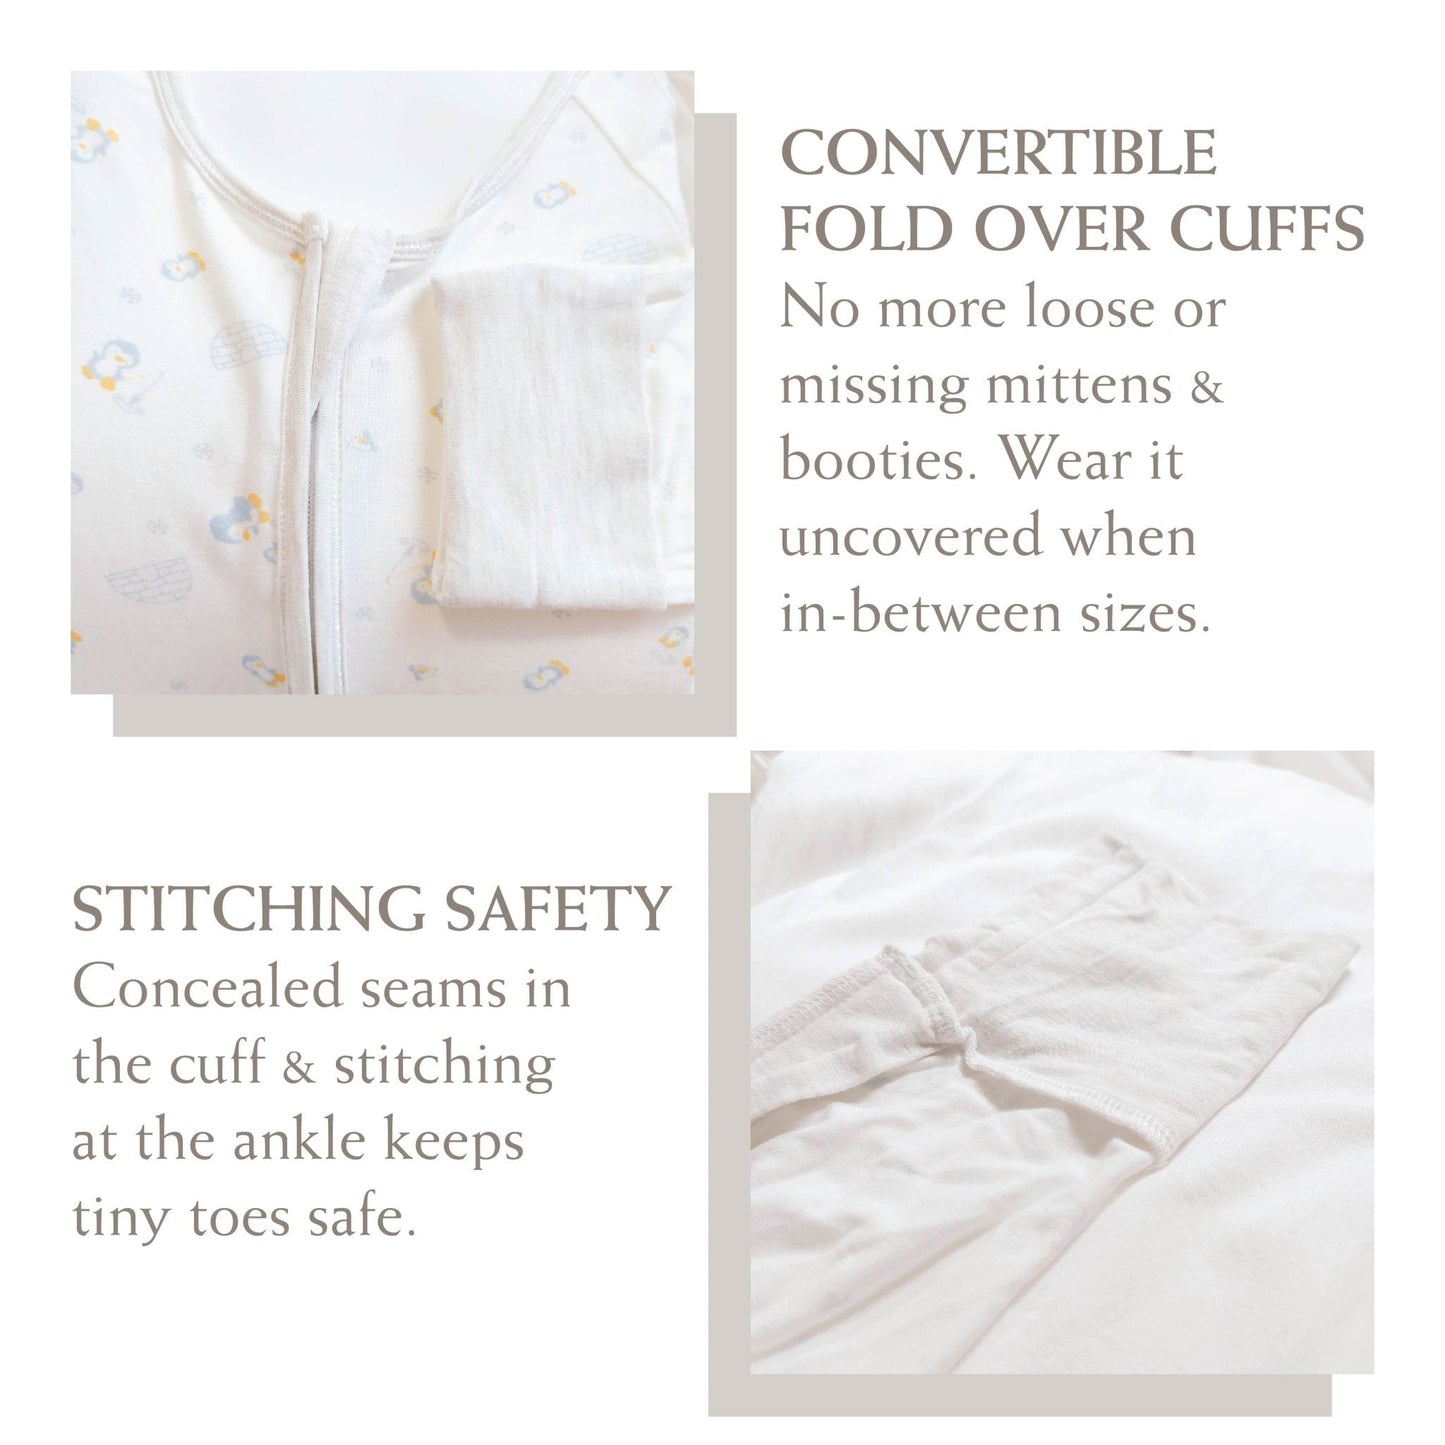 Singapore - Long-sleeved Zipper Sleepsuit with Convertible Cuffs / Mittens & Footie